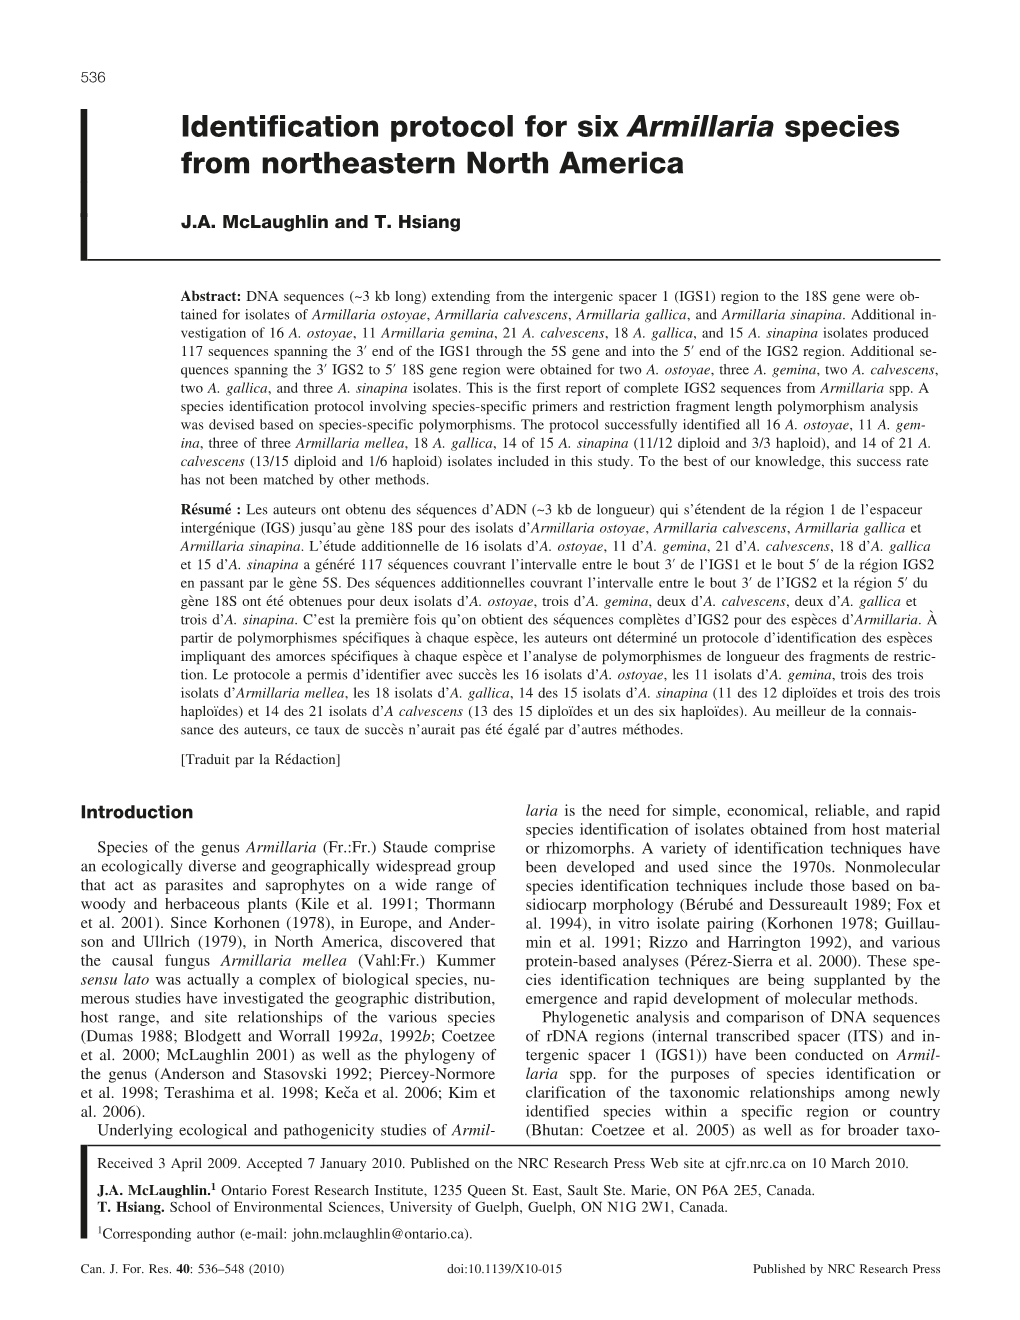 Identification Protocol for Six Armillaria Species from Northeastern North America